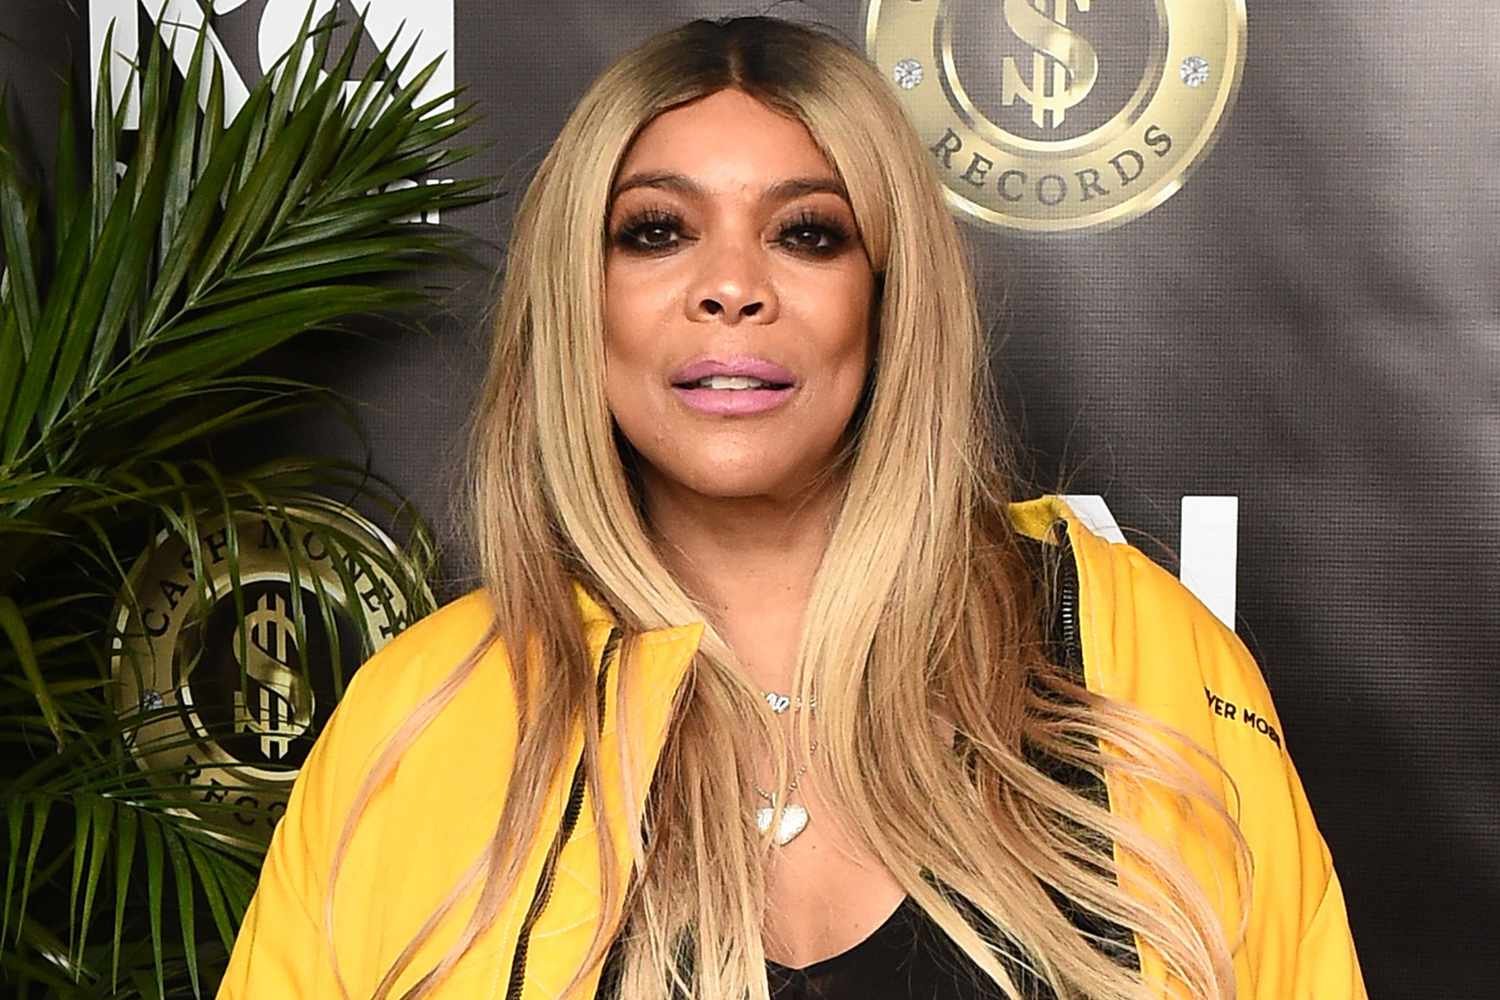 Wendy Williams 'touched' by response to her dementia diagnosis, asks for 'personal space and peace'